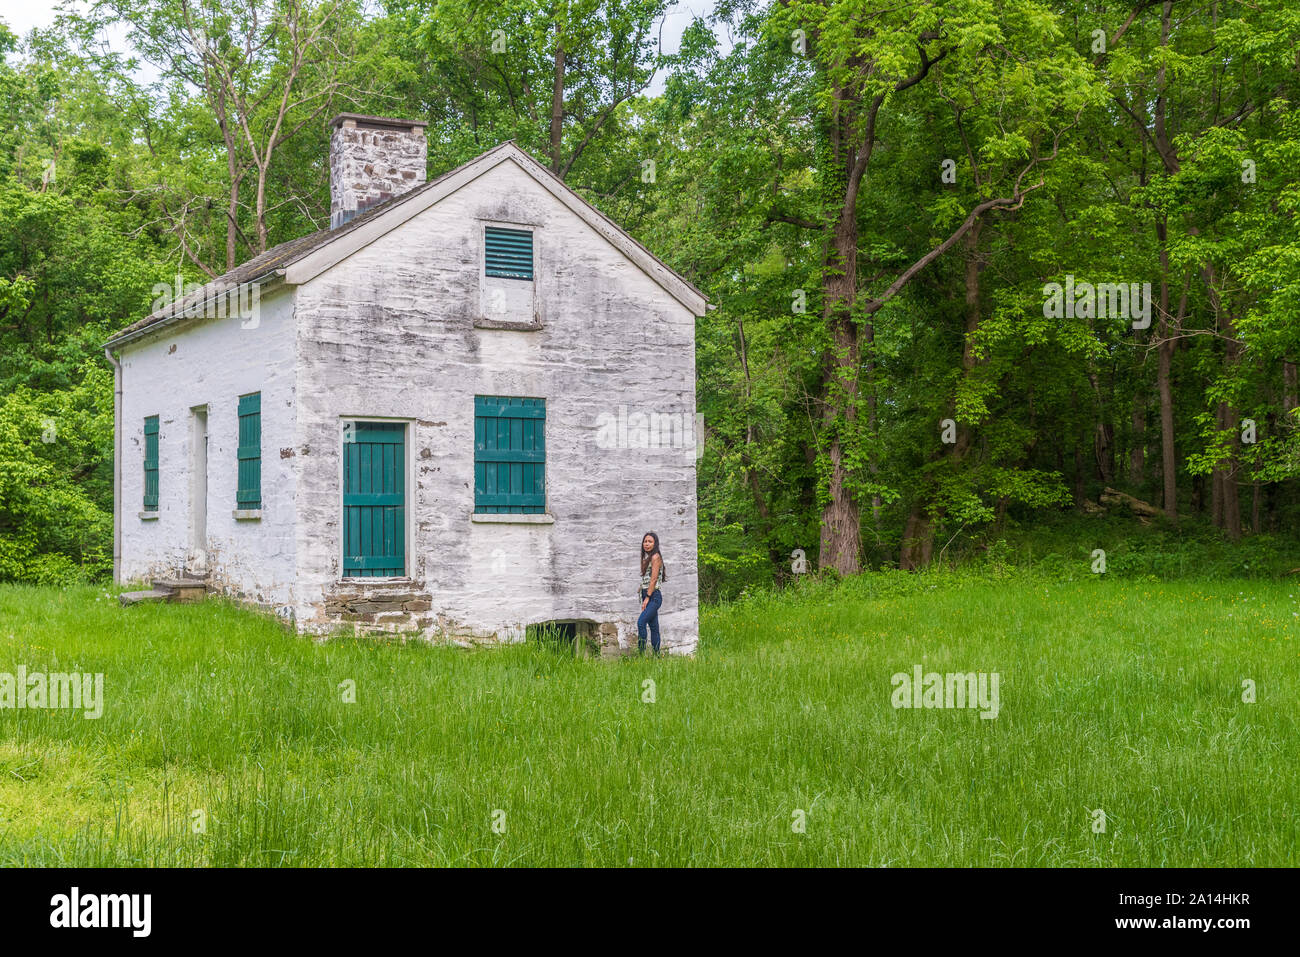 Woman standing by lock keepers white house with green shutters and door on the Chesapeake and Ohio Canal Stock Photo